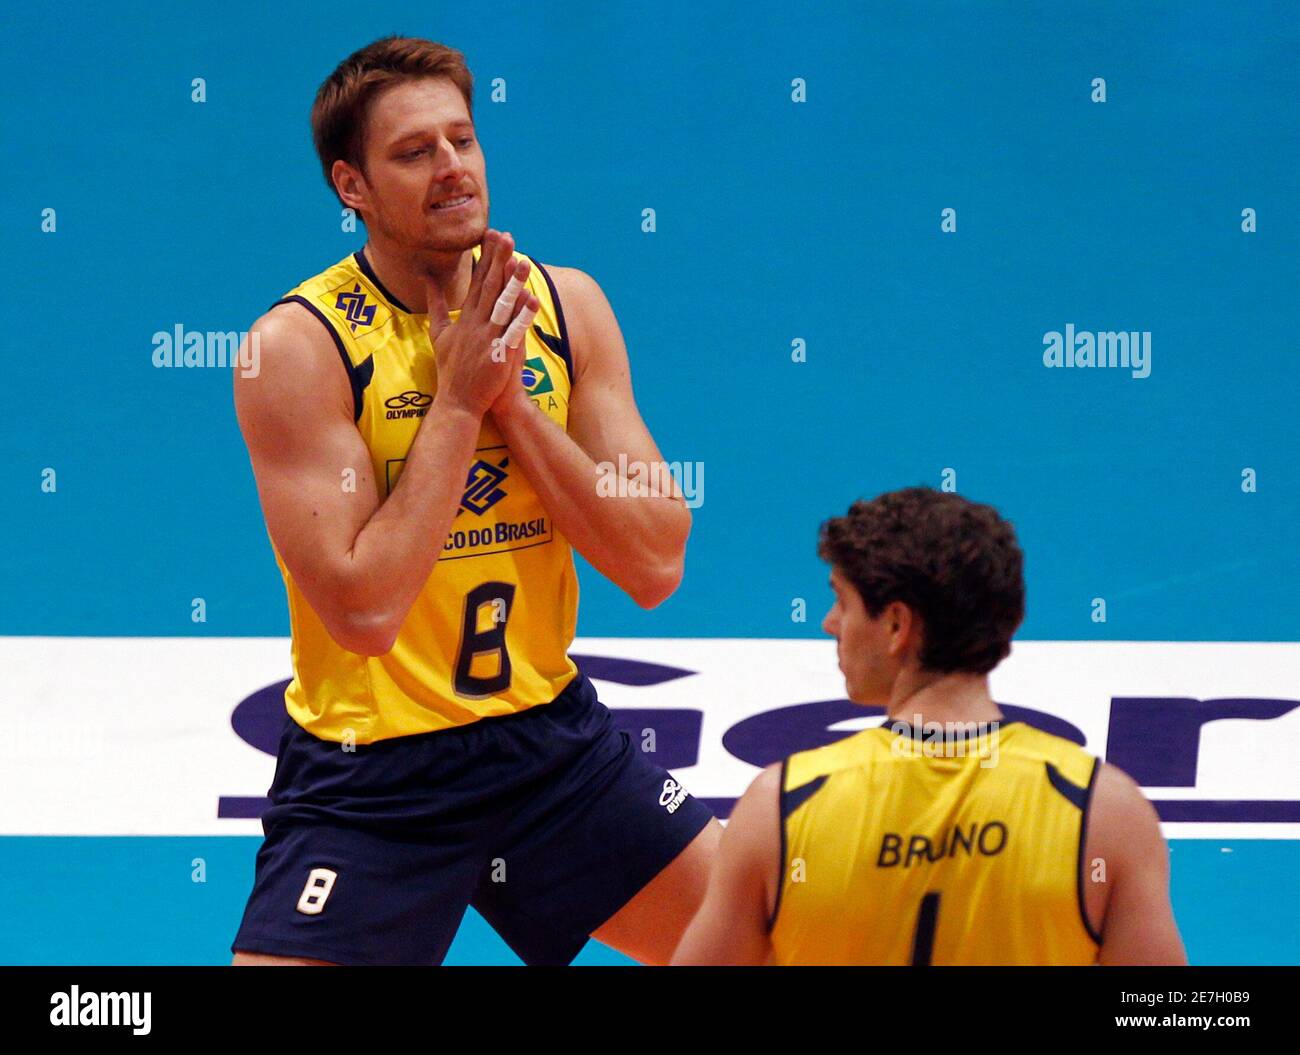 Brazil's Murilo Endres (L) reacts next to teammate Bruno Rezende after  losing a point during their match against Cuba in the Volleyball World  League final round in Cordoba, July 24, 2010. REUTERS/Marcos